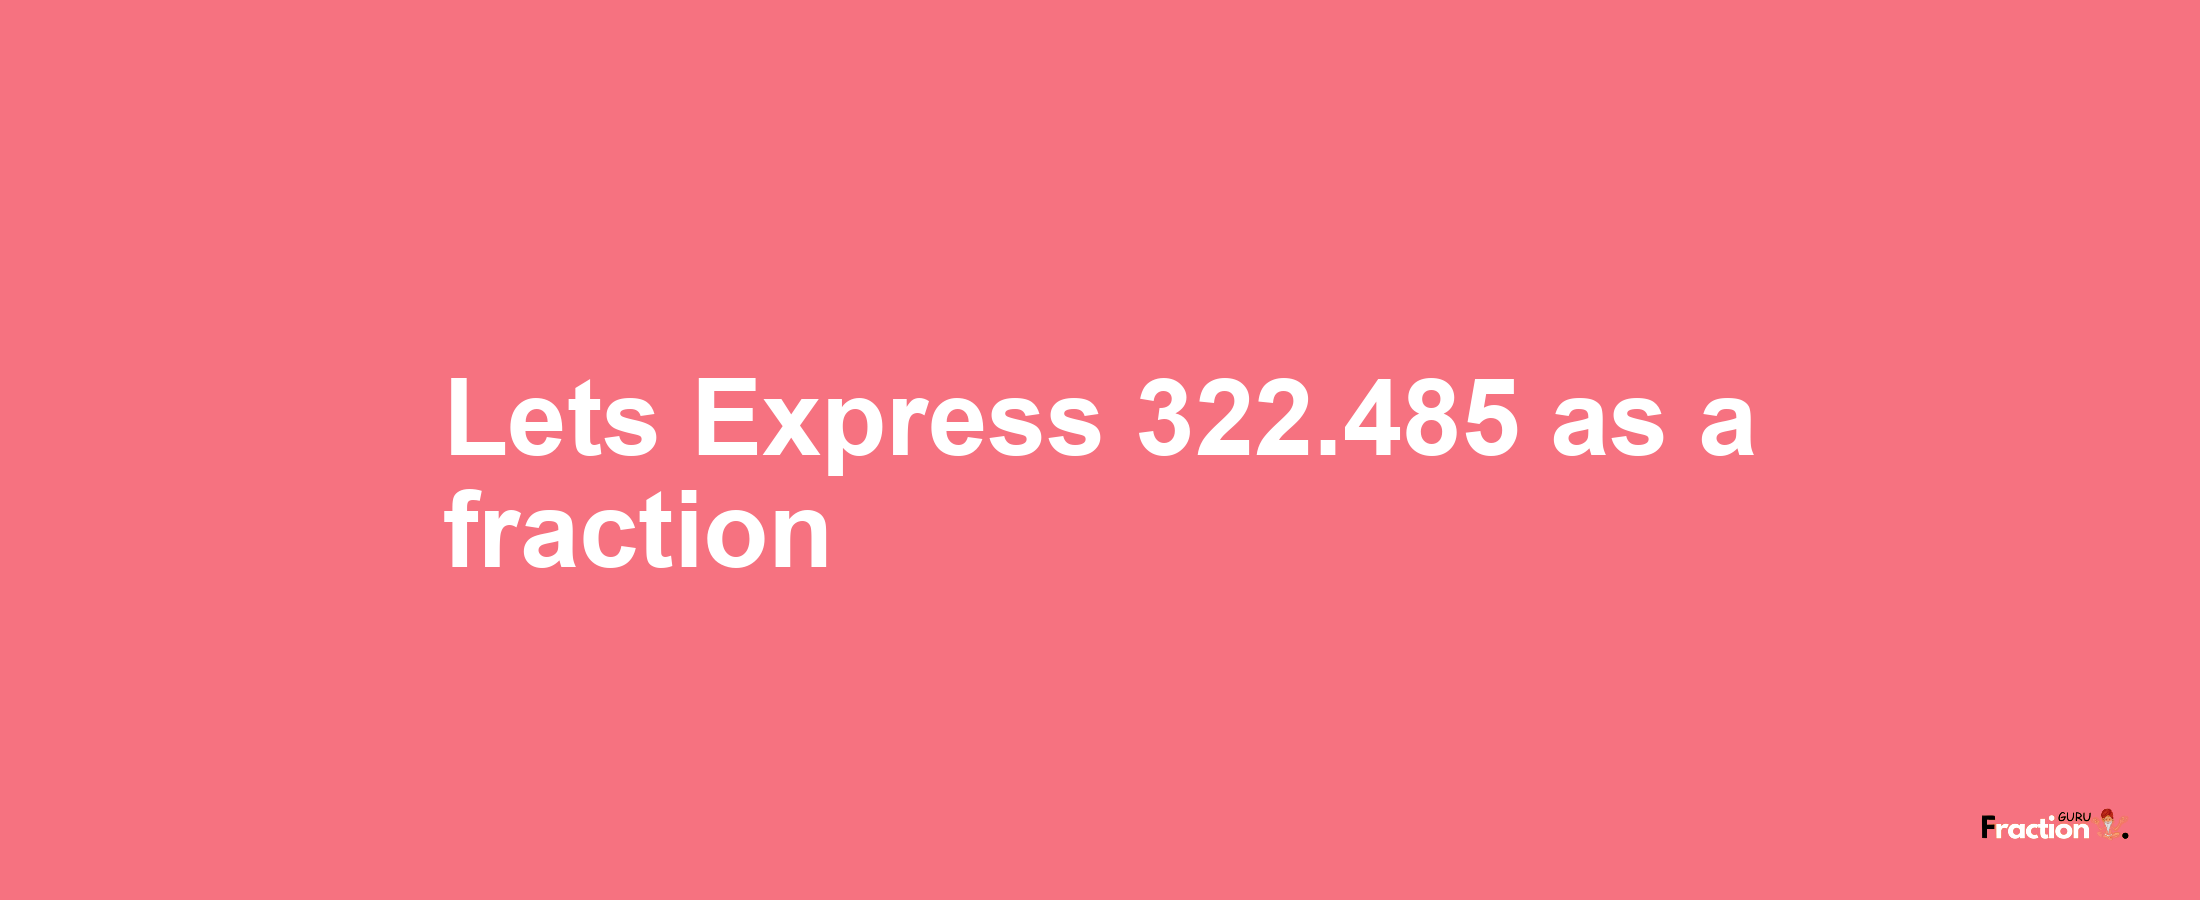 Lets Express 322.485 as afraction